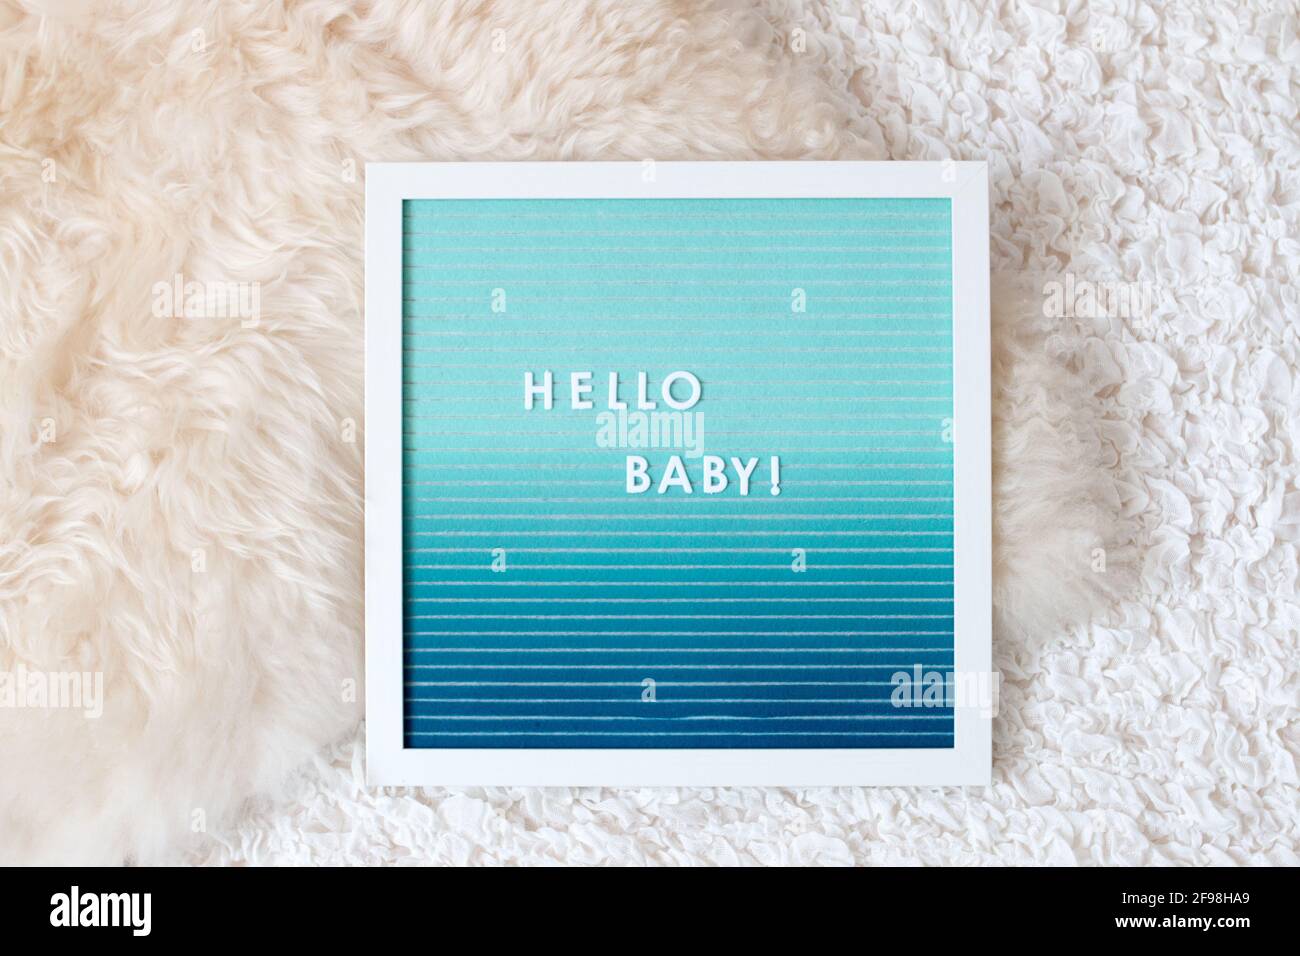 Letterboard 'Hello Baby' / Welcome Baby, blue, boy Stock Photo